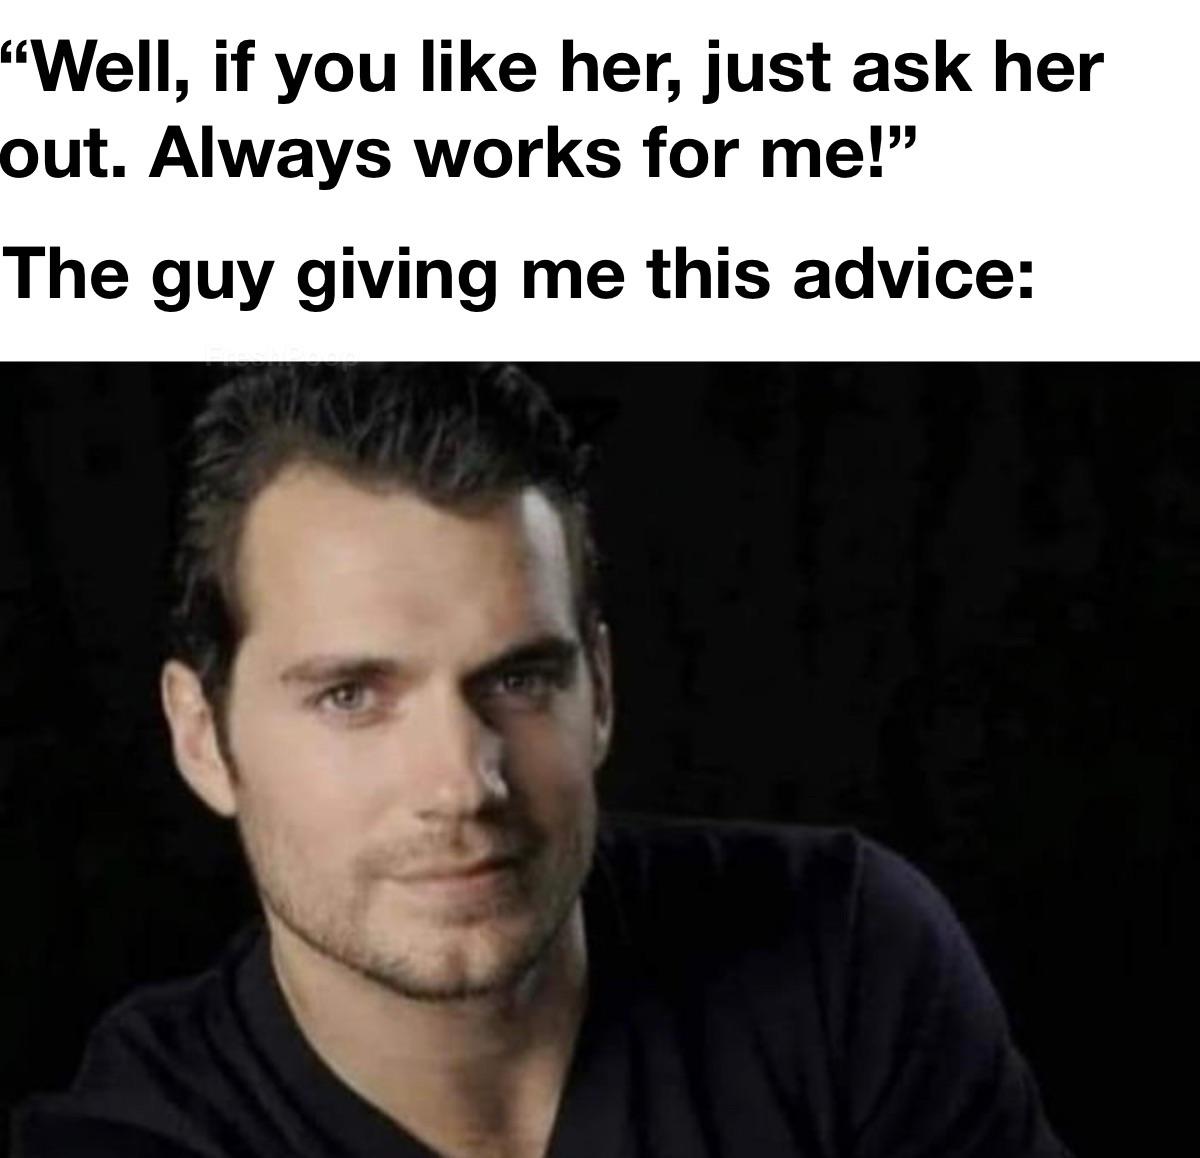 henry cavill - "Well, if you her, just ask her out. Always works for me!" The guy giving me this advice